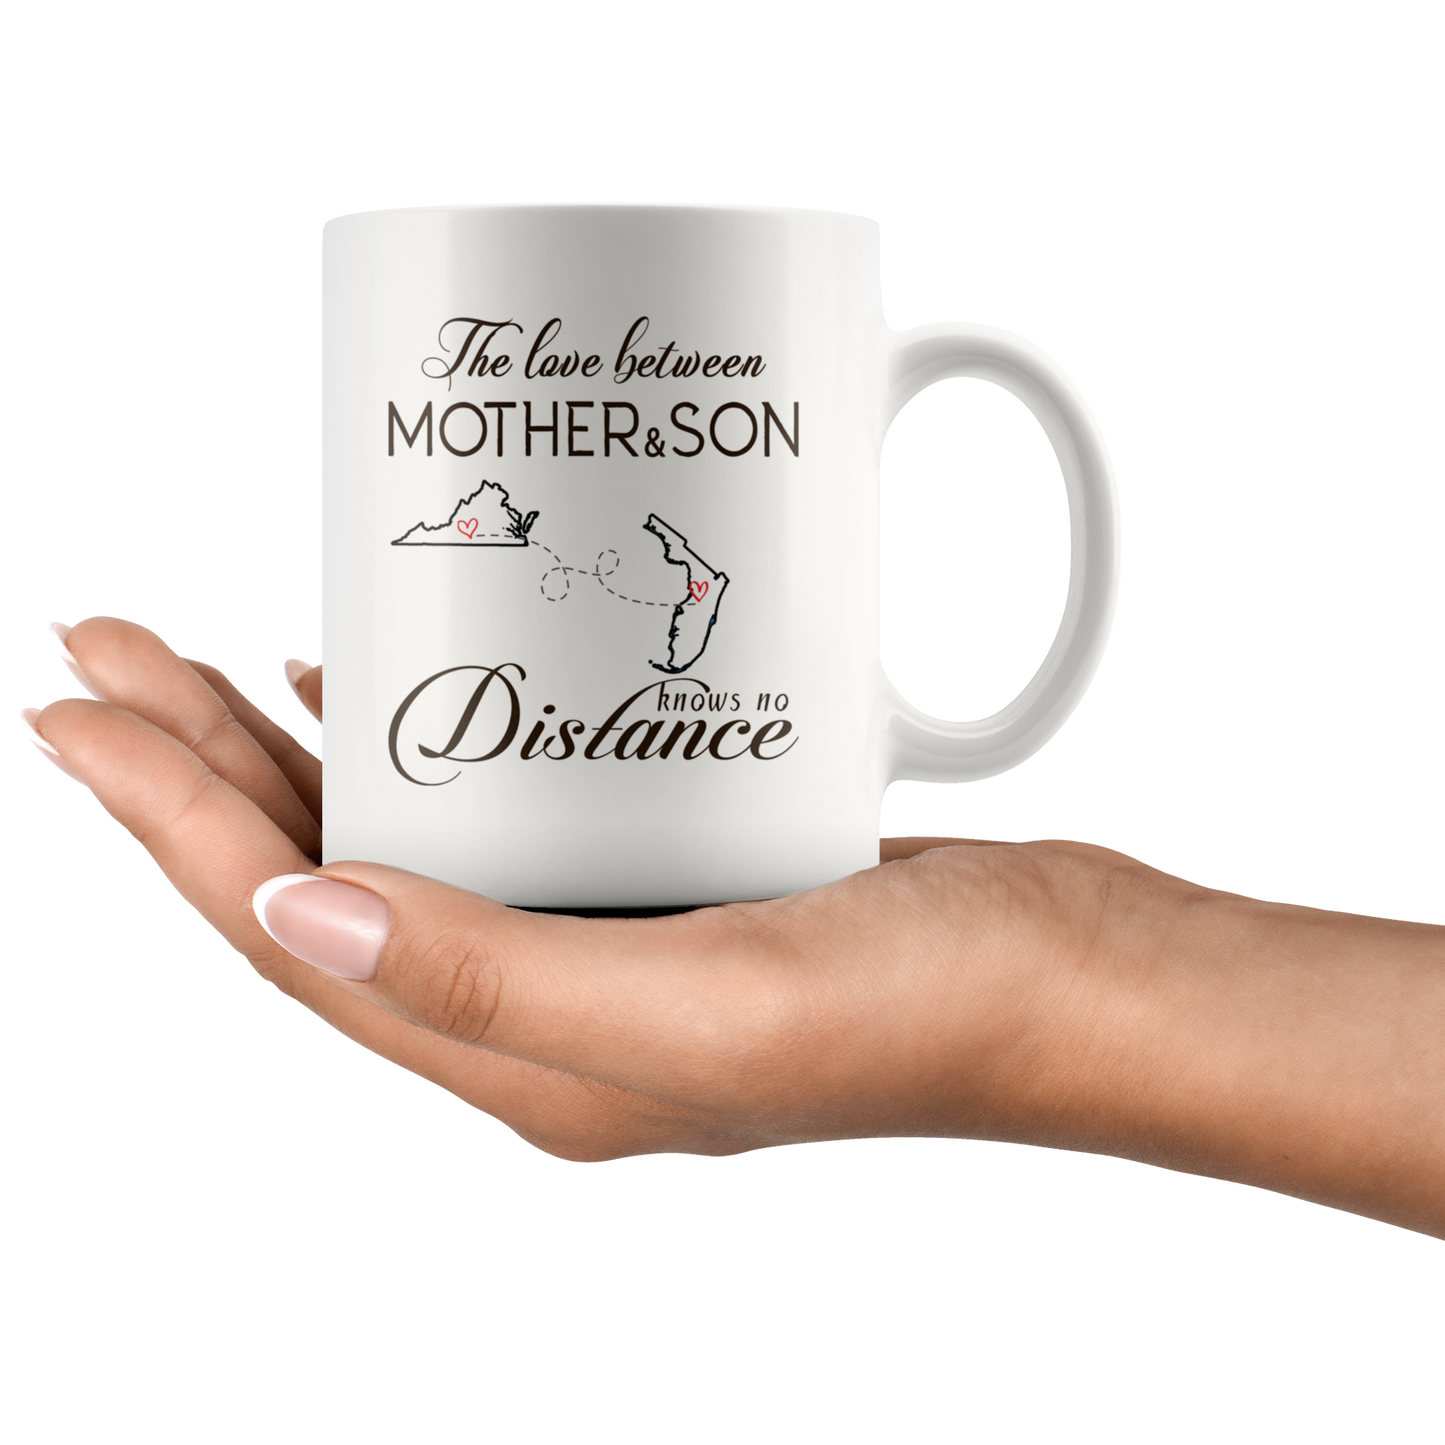 ND20604535-15oz-sp-24337 - [ Virginia | Florida | Mother And Son ]Personalized Long Distance State Coffee Mug - The Love Betwe